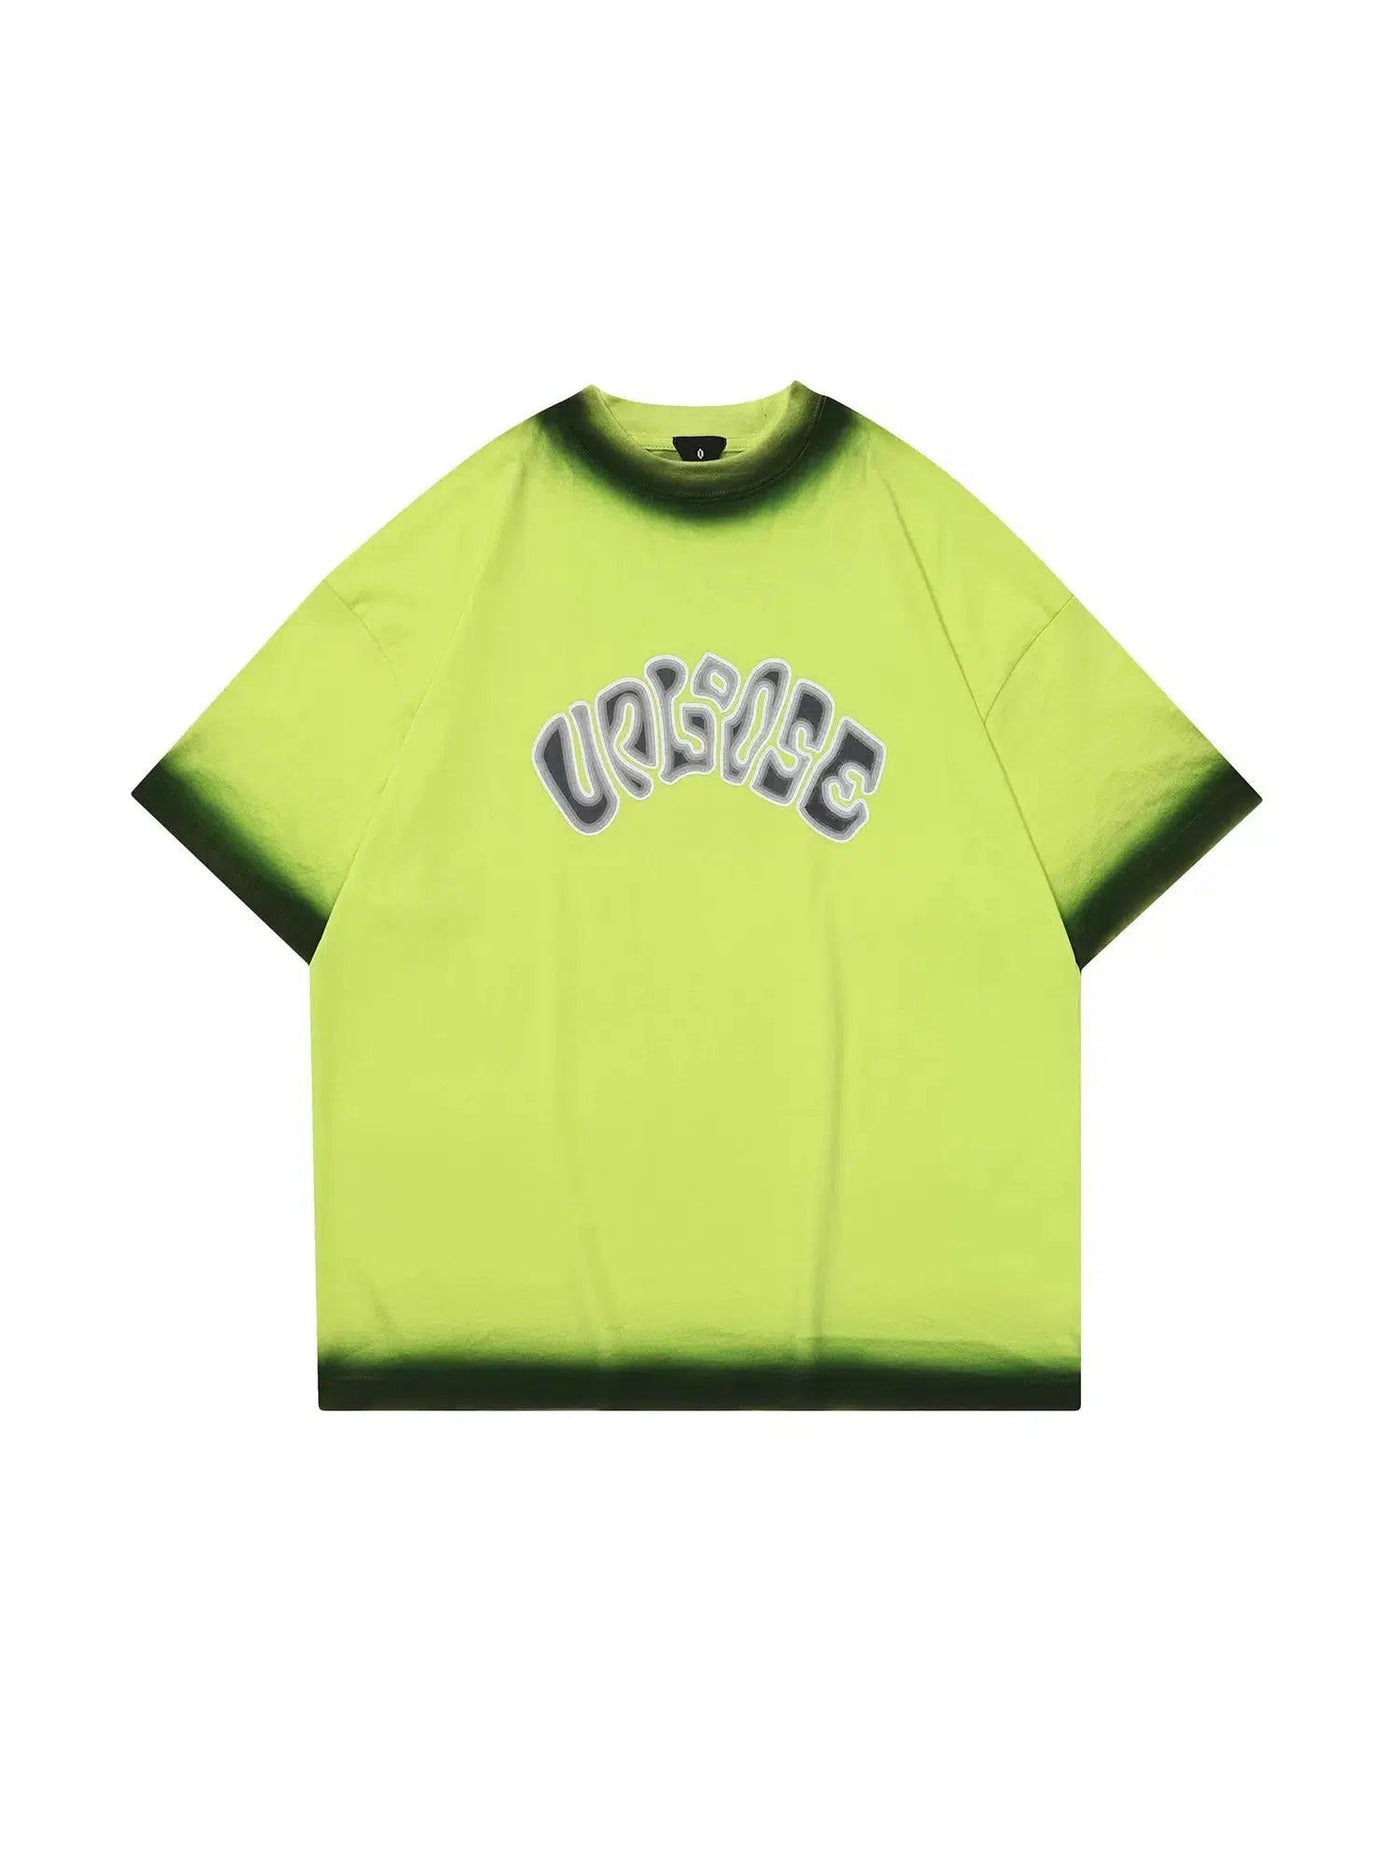 Gradient Absract Letters T-Shirt Korean Street Fashion T-Shirt By MaxDstr Shop Online at OH Vault